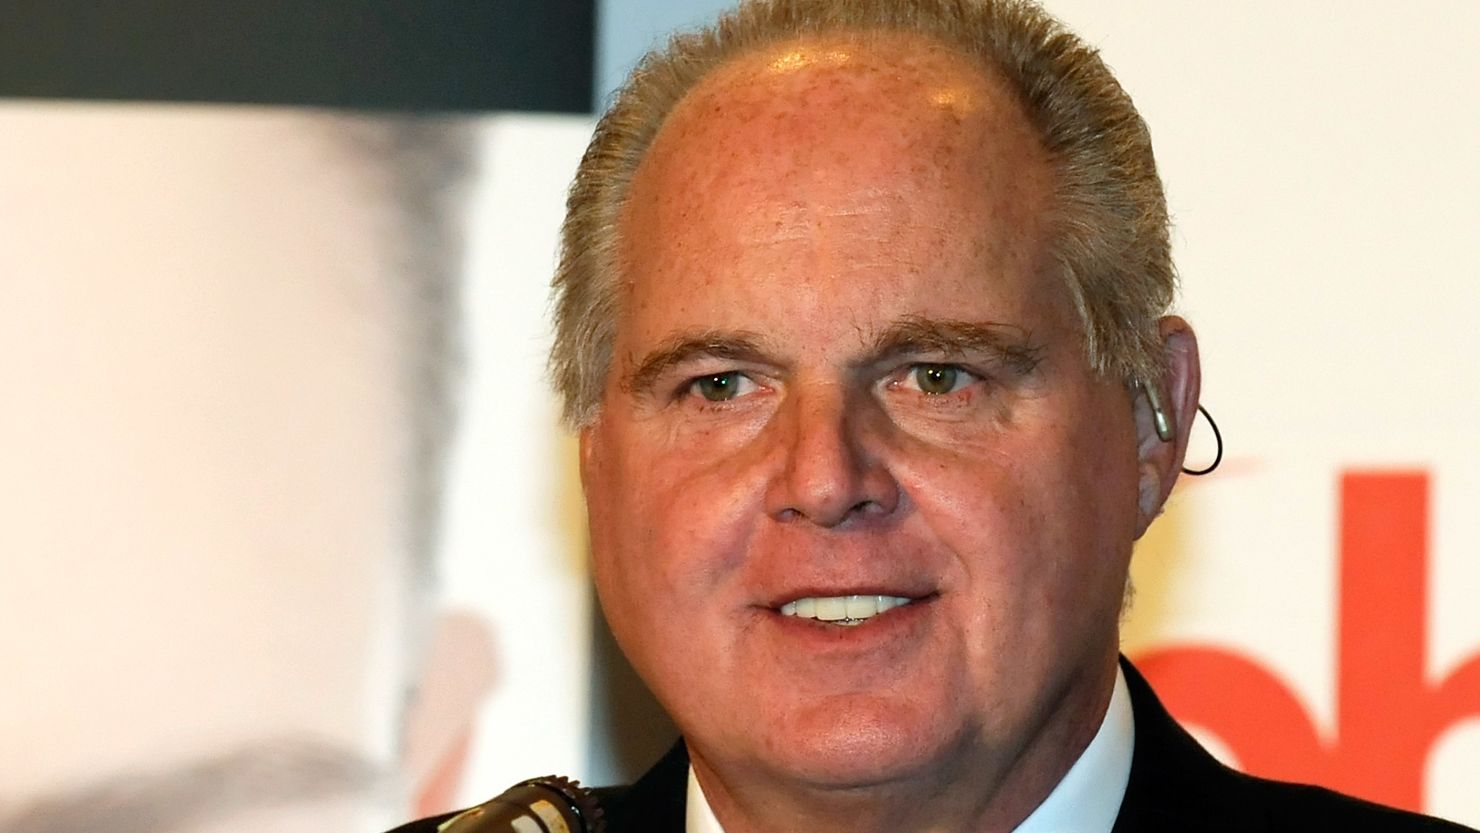 Right-wing commentator Rush Limbaugh: "Nine out of 10 bloggers writing high-tech hate Apple."